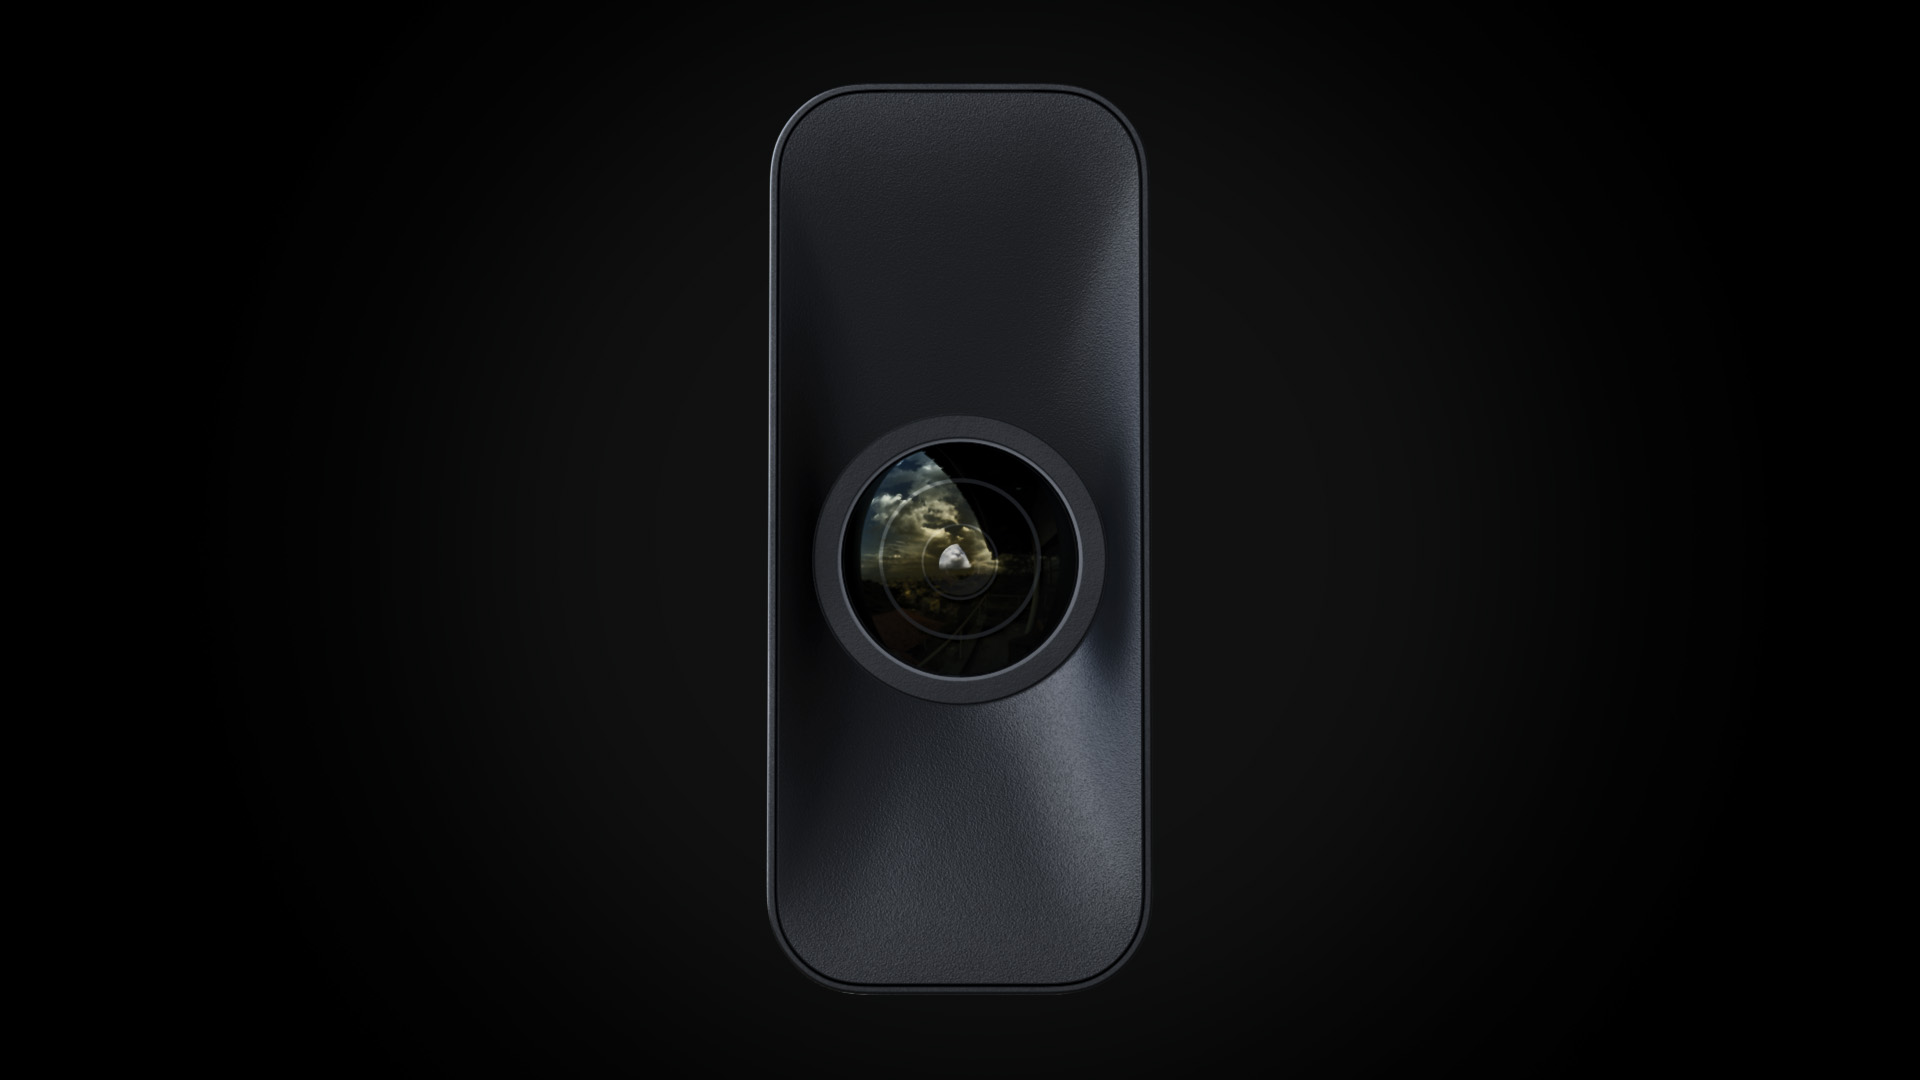 The custom 20MP Pro3 lens covers an ultra-wide angle for life-like digital twins in any environment